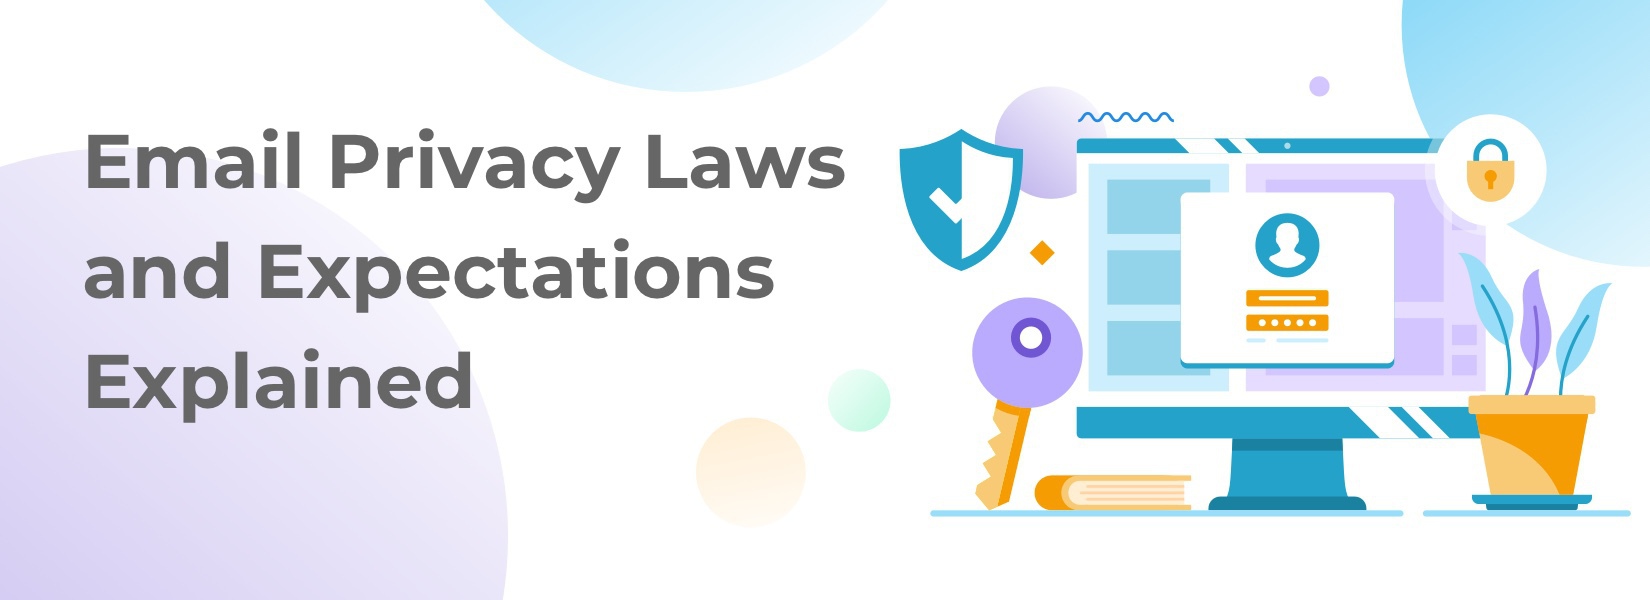 Email Privacy Laws and Expectations Explained